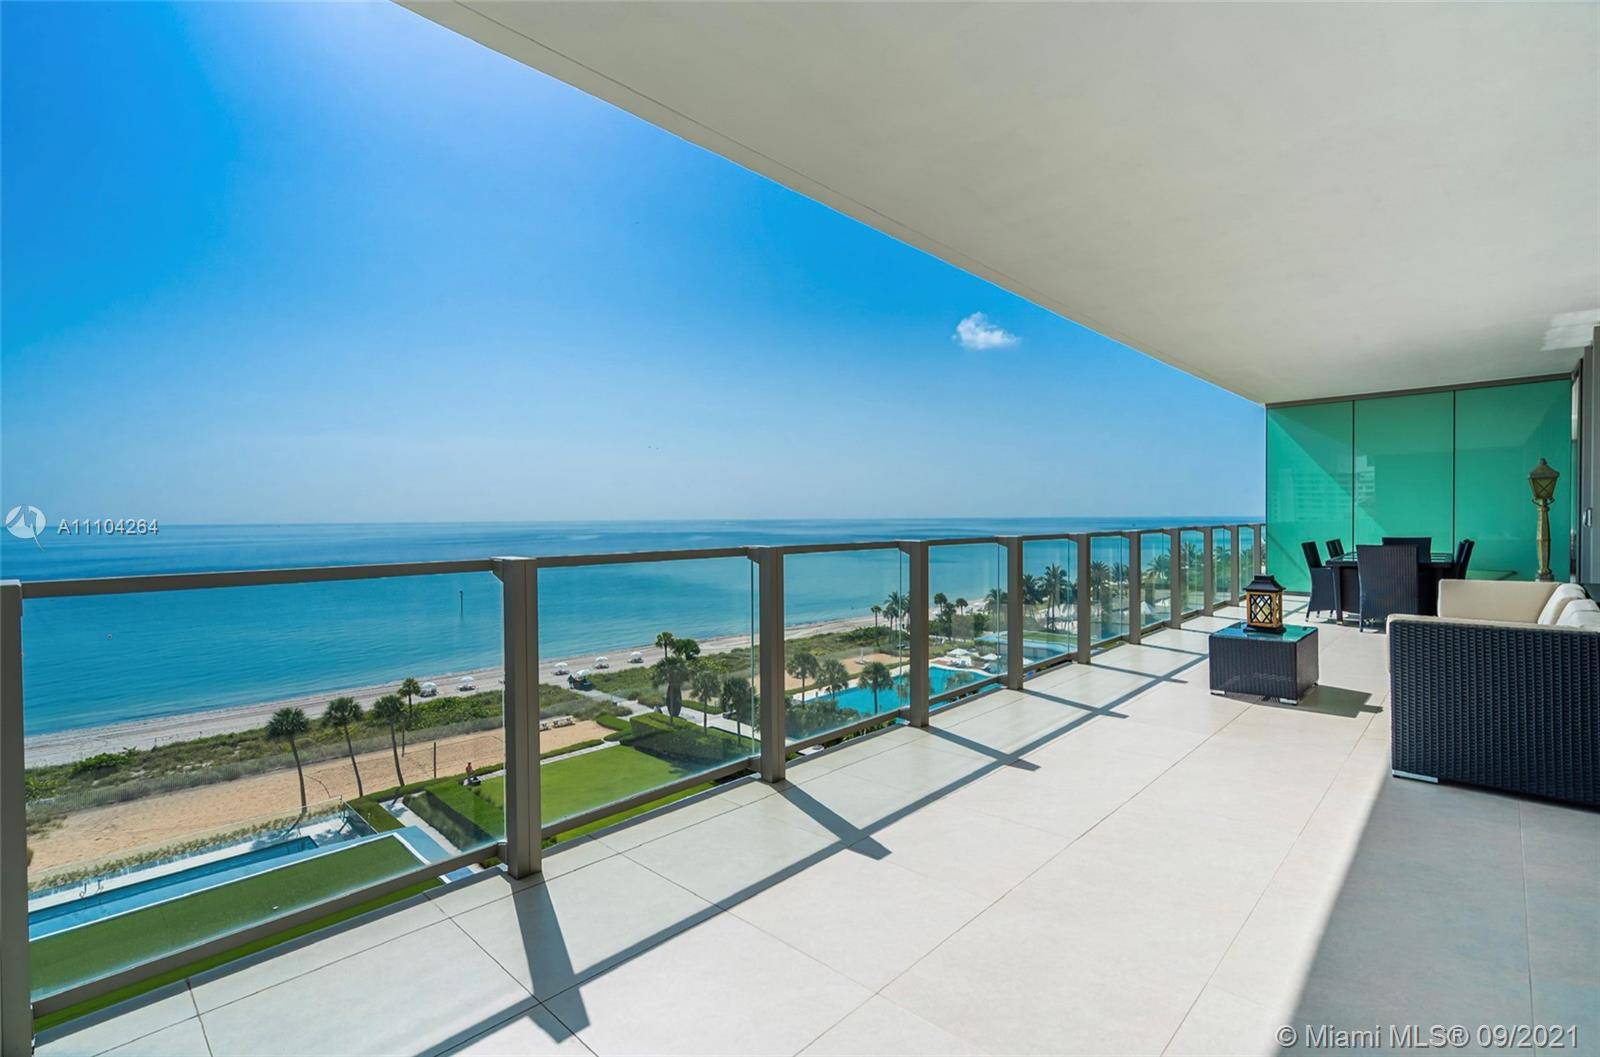 Modern, high end fully furnished flow through unit at the exclusive Oceana in Key Biscayne !